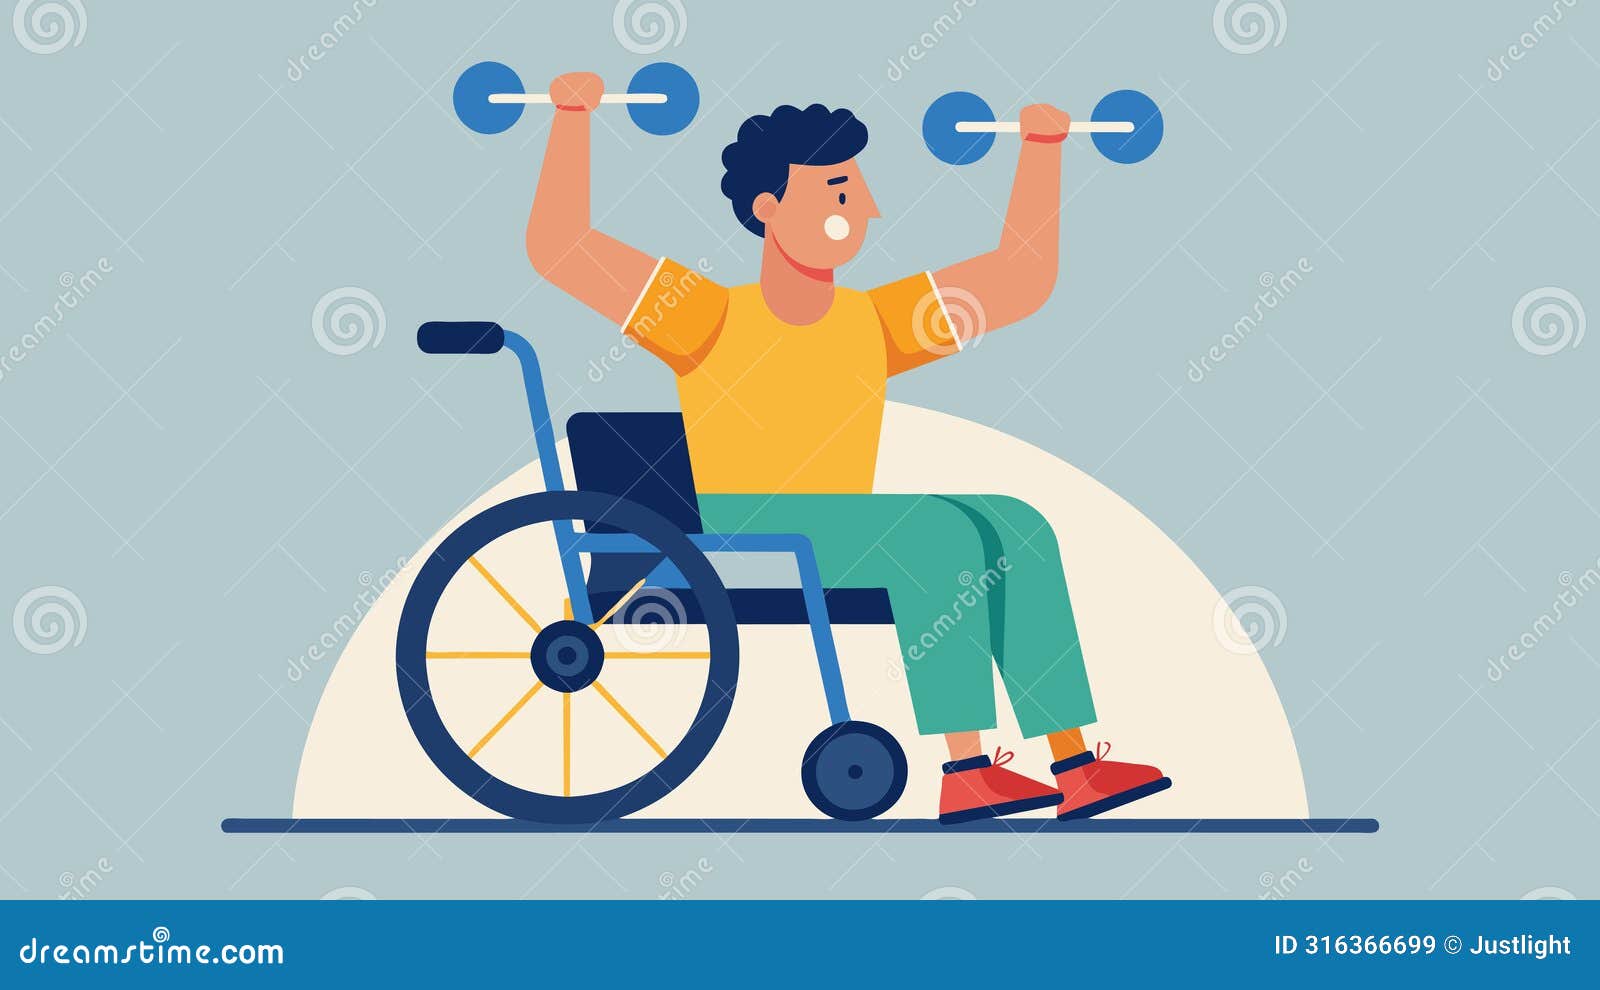 a wheelchairfriendly workout program for individuals with muscular dystrophy incorporating upper body exercises and